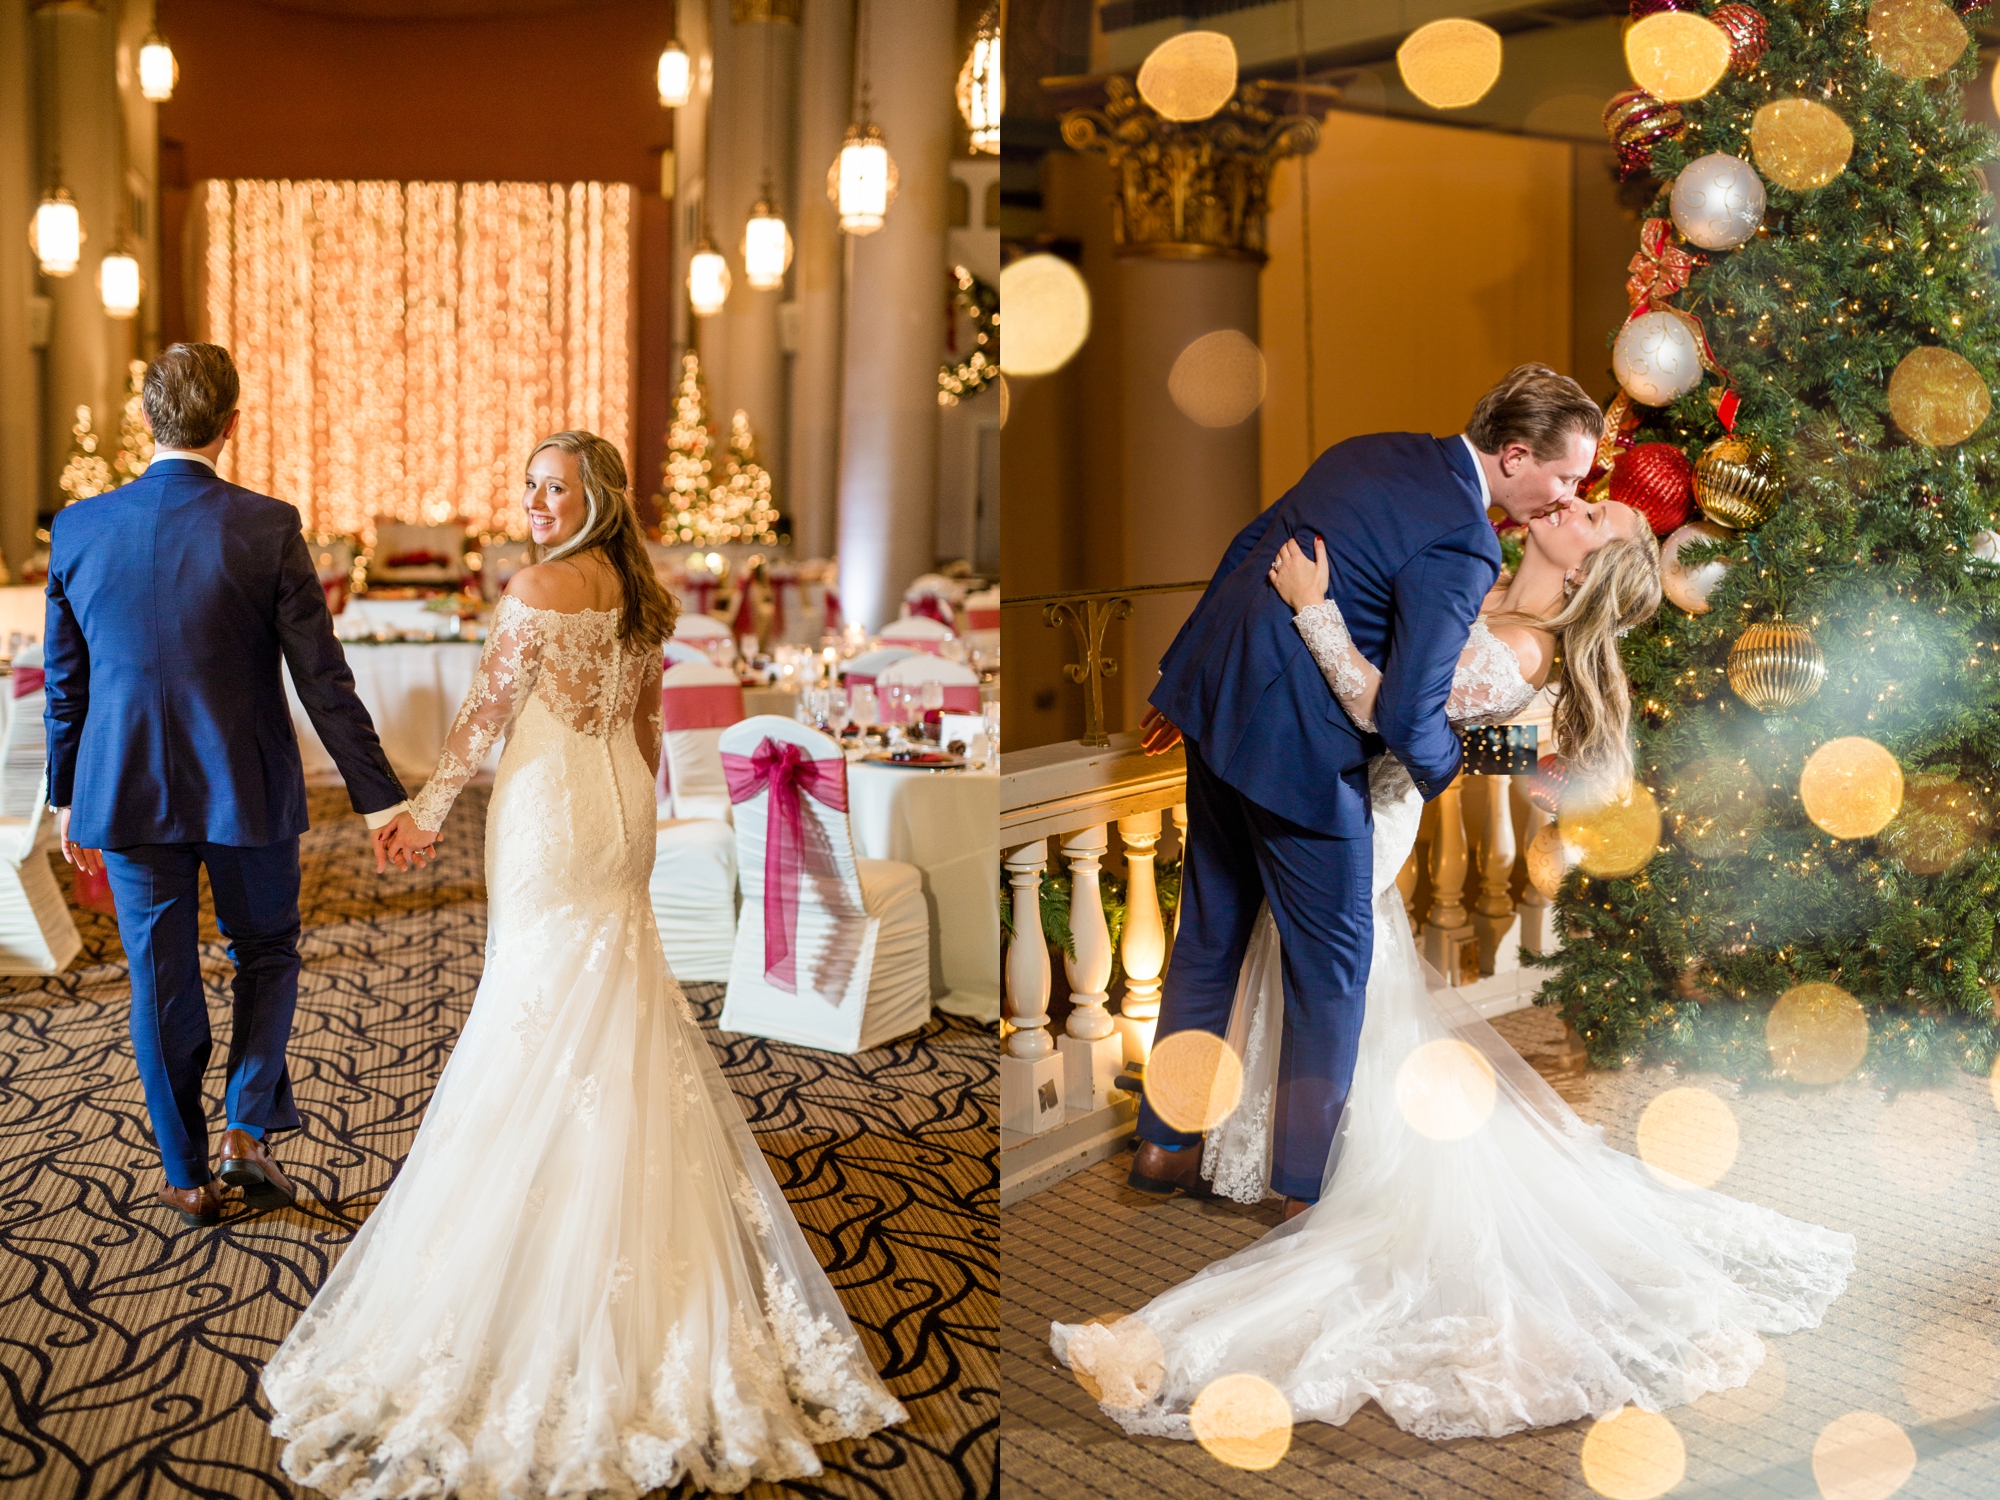 pittsburgh wedding photographer, the best pittsburgh wedding photographers, pittsburgh wedding venues, the grand hall at the priory wedding photos